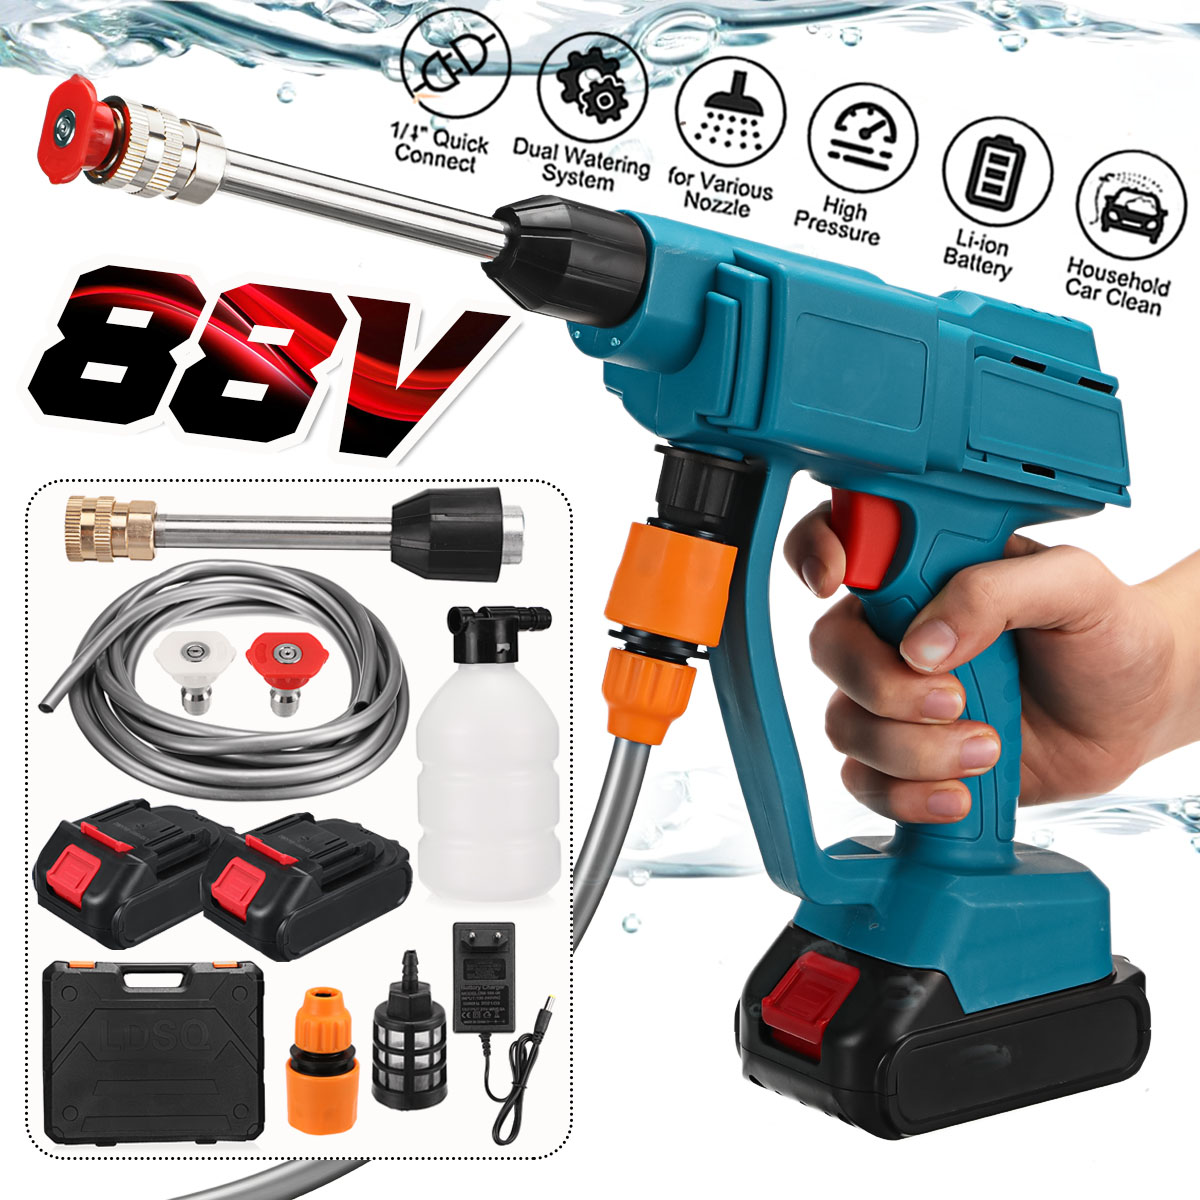 88VF-Cordless-High-Pressure-Washer-Car-Washing-Machine-Water-Cleaner-Spray-Guns-W-None12-Battery-For-1870219-1